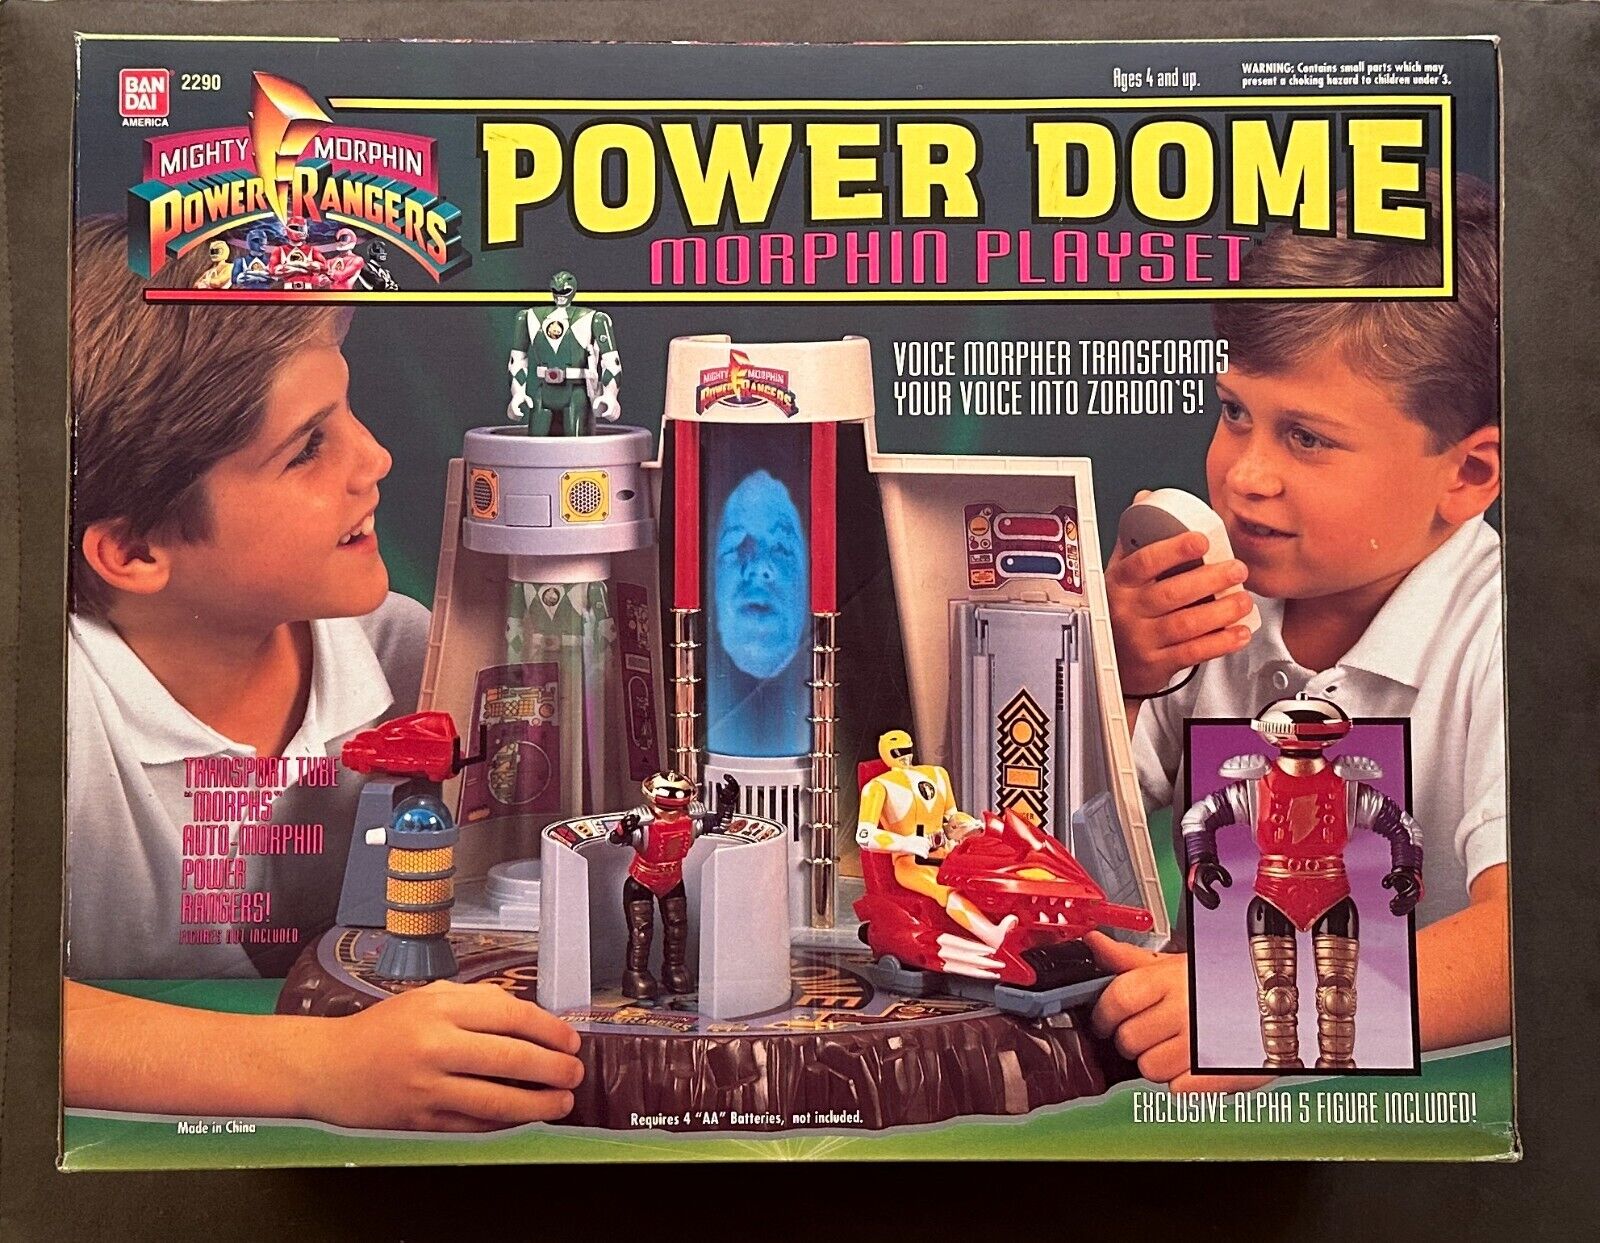 NEW SEALED Bandai Mighty Morphin Power Rangers 1994 Power Dome 2290 Command